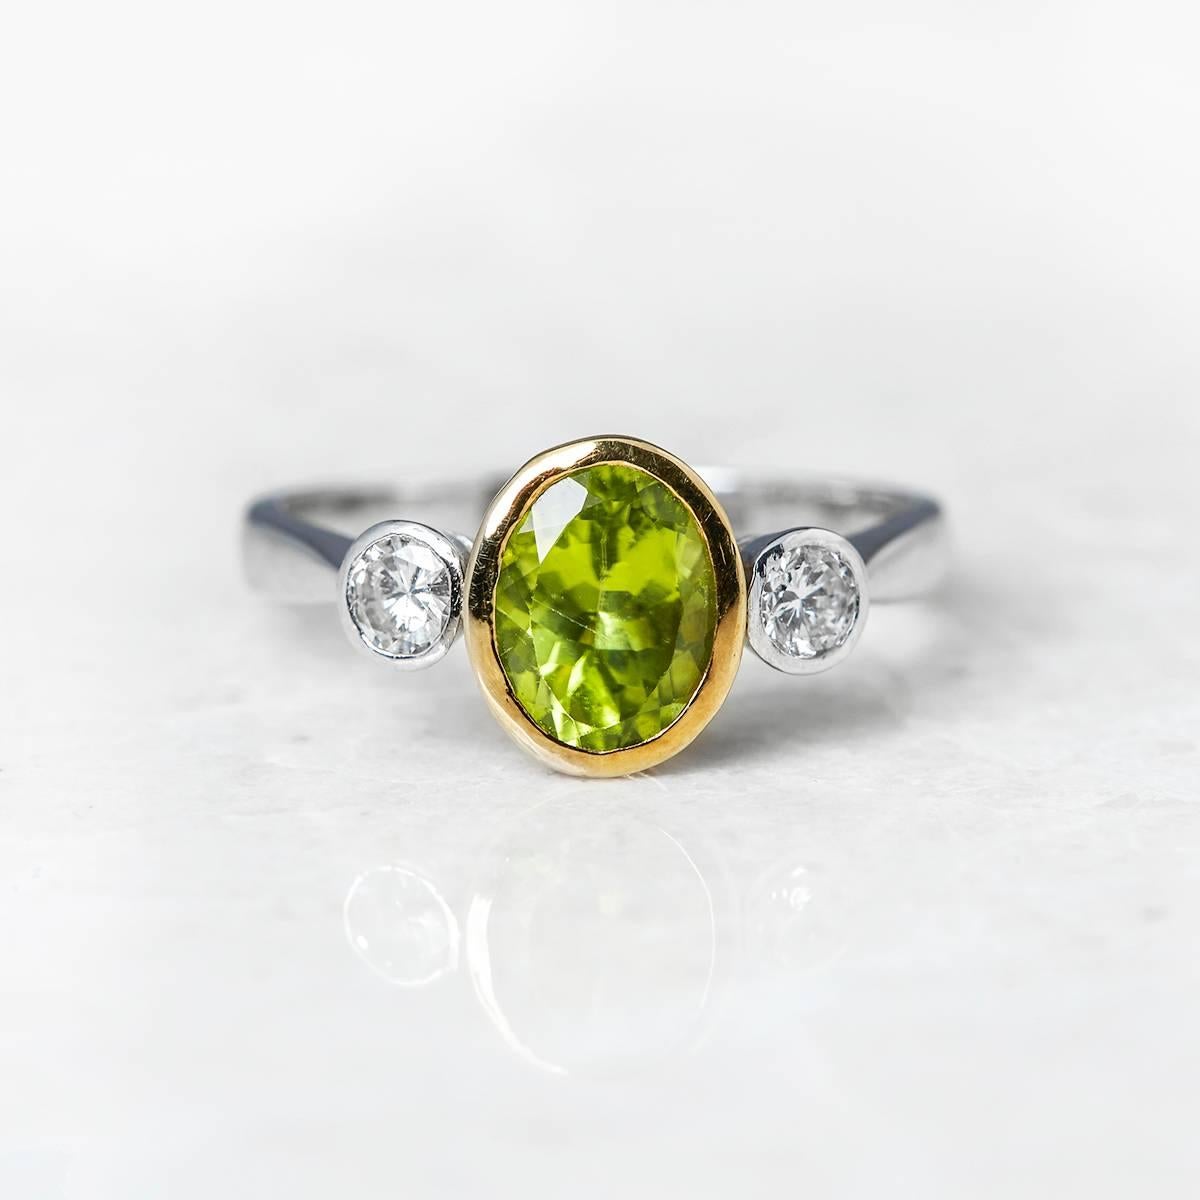 Code: COM318
Description: 18k White & Yellow Gold 1.25ct Peridot & 0.40ct Diamond Ring
Accompanied With: Papers & Presentation Box
Gender: Ladies
UK Ring Size: M
EU Ring Size: 52 1/2
US Ring Size: 6 1/4
Resizing Possible?: YES
Band Width: